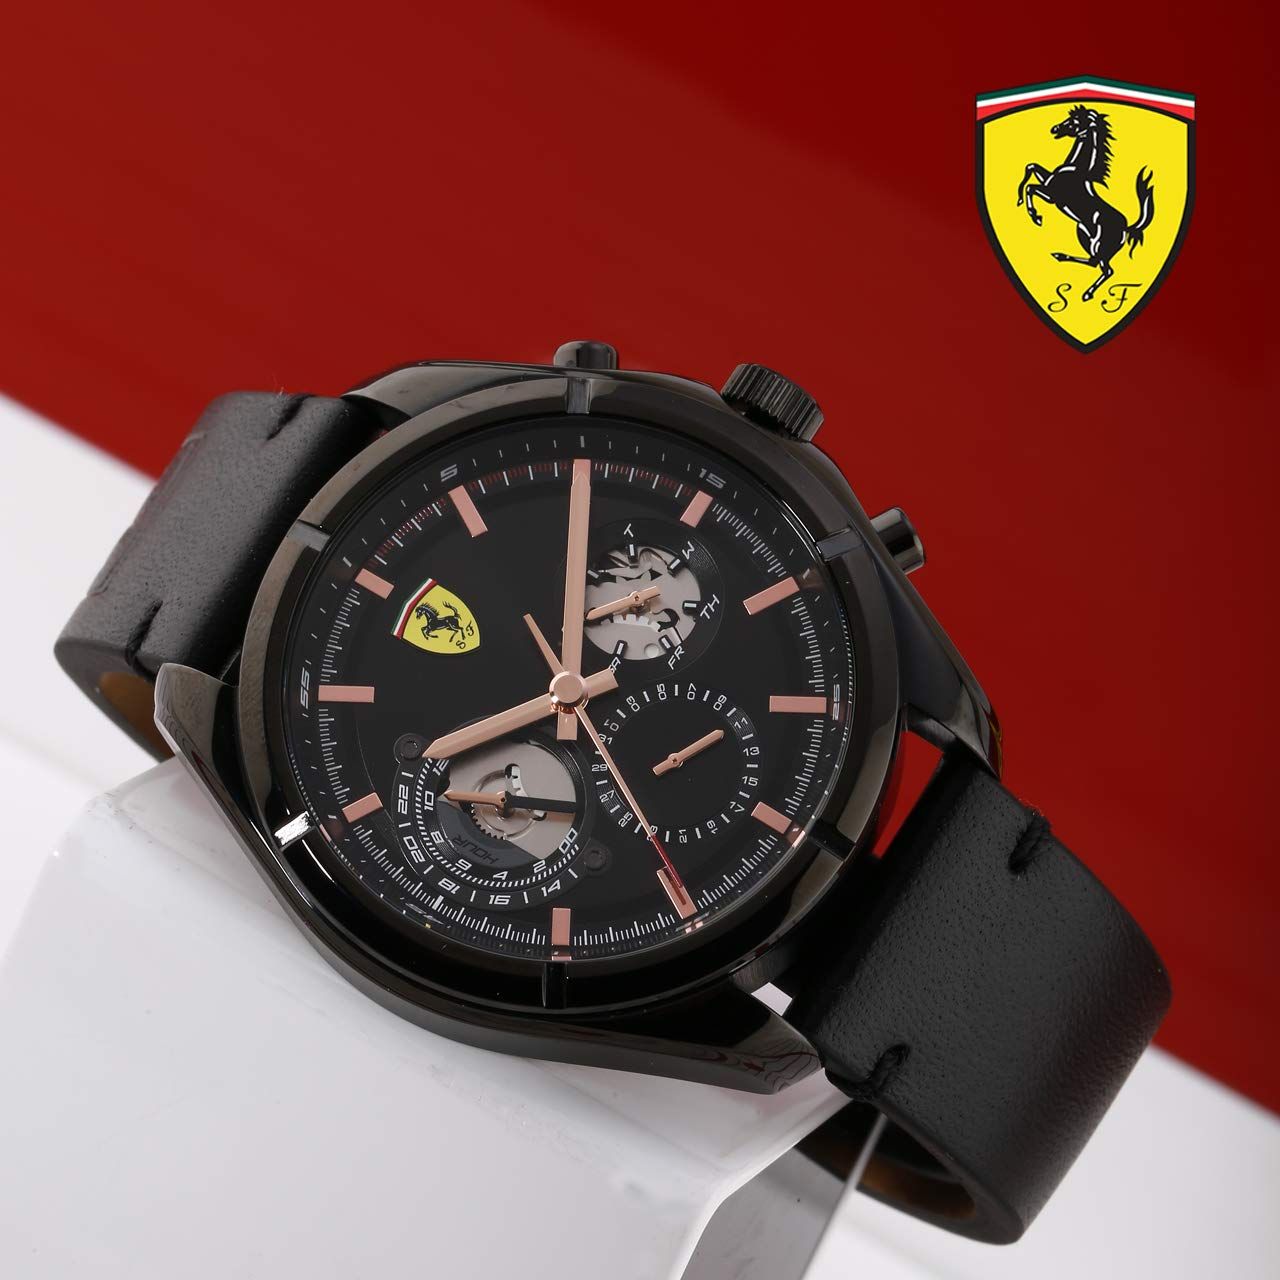 This Ferrari Speedracer Multi Dial Watch for Men is the perfect timepiece to wear or to gift. It's Black 45 mm Round case combined with the comfortable Black Leather will ensure you enjoy this stunning timepiece without any compromise. Operated by a high quality Quartz movement and water resistant to 5 bars, your watch will keep ticking. This fashionable, classic watch is a perfect gift for New Year, birthday,valentine's day and so on -The watch has a Calendar function: Day-Date, 24-hour Display High quality 21 cm length and 21 mm width Black Leather strap with a Buckle Case diameter: 45 mm,case thickness: 10 mm, case colour: Black and dial colour: Black